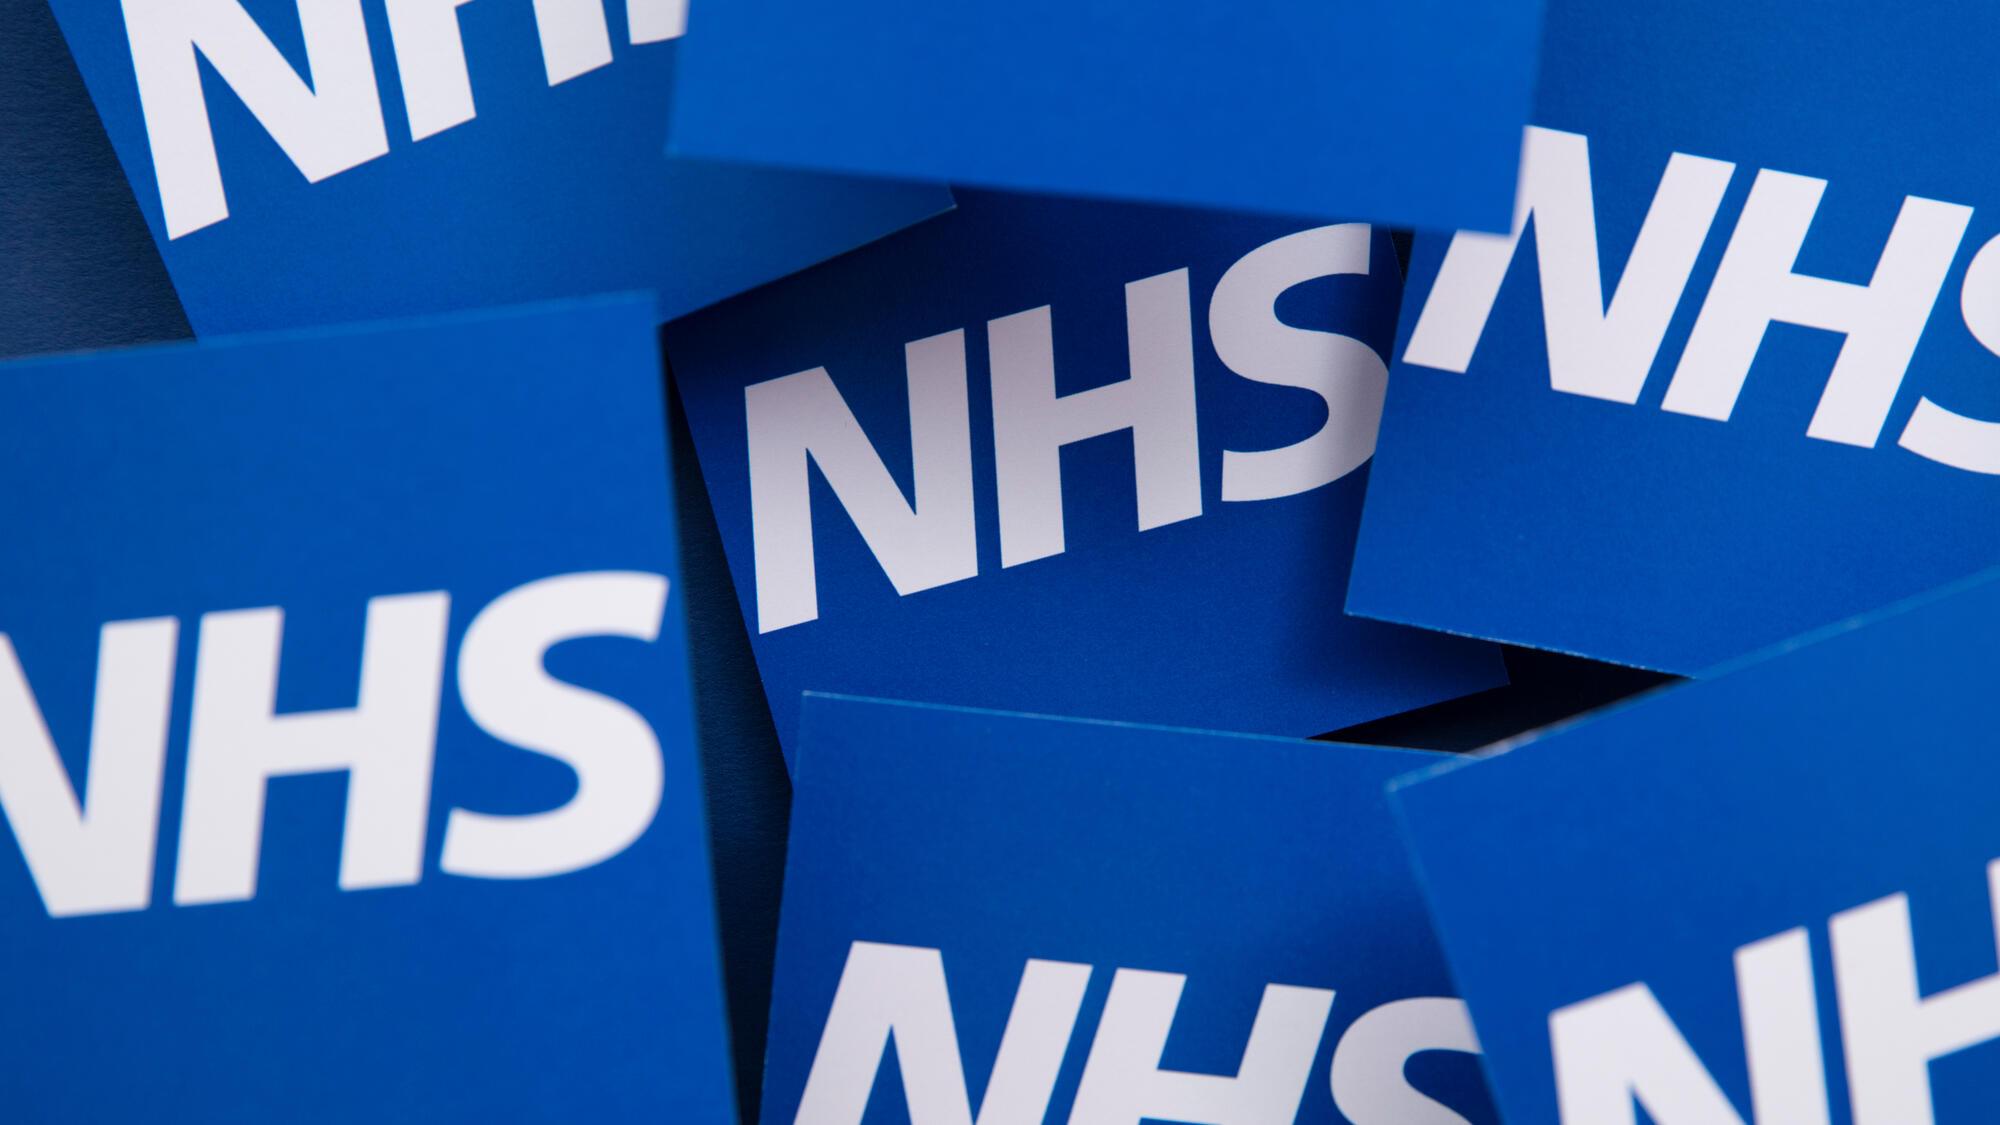 NHS logo repeated in squares